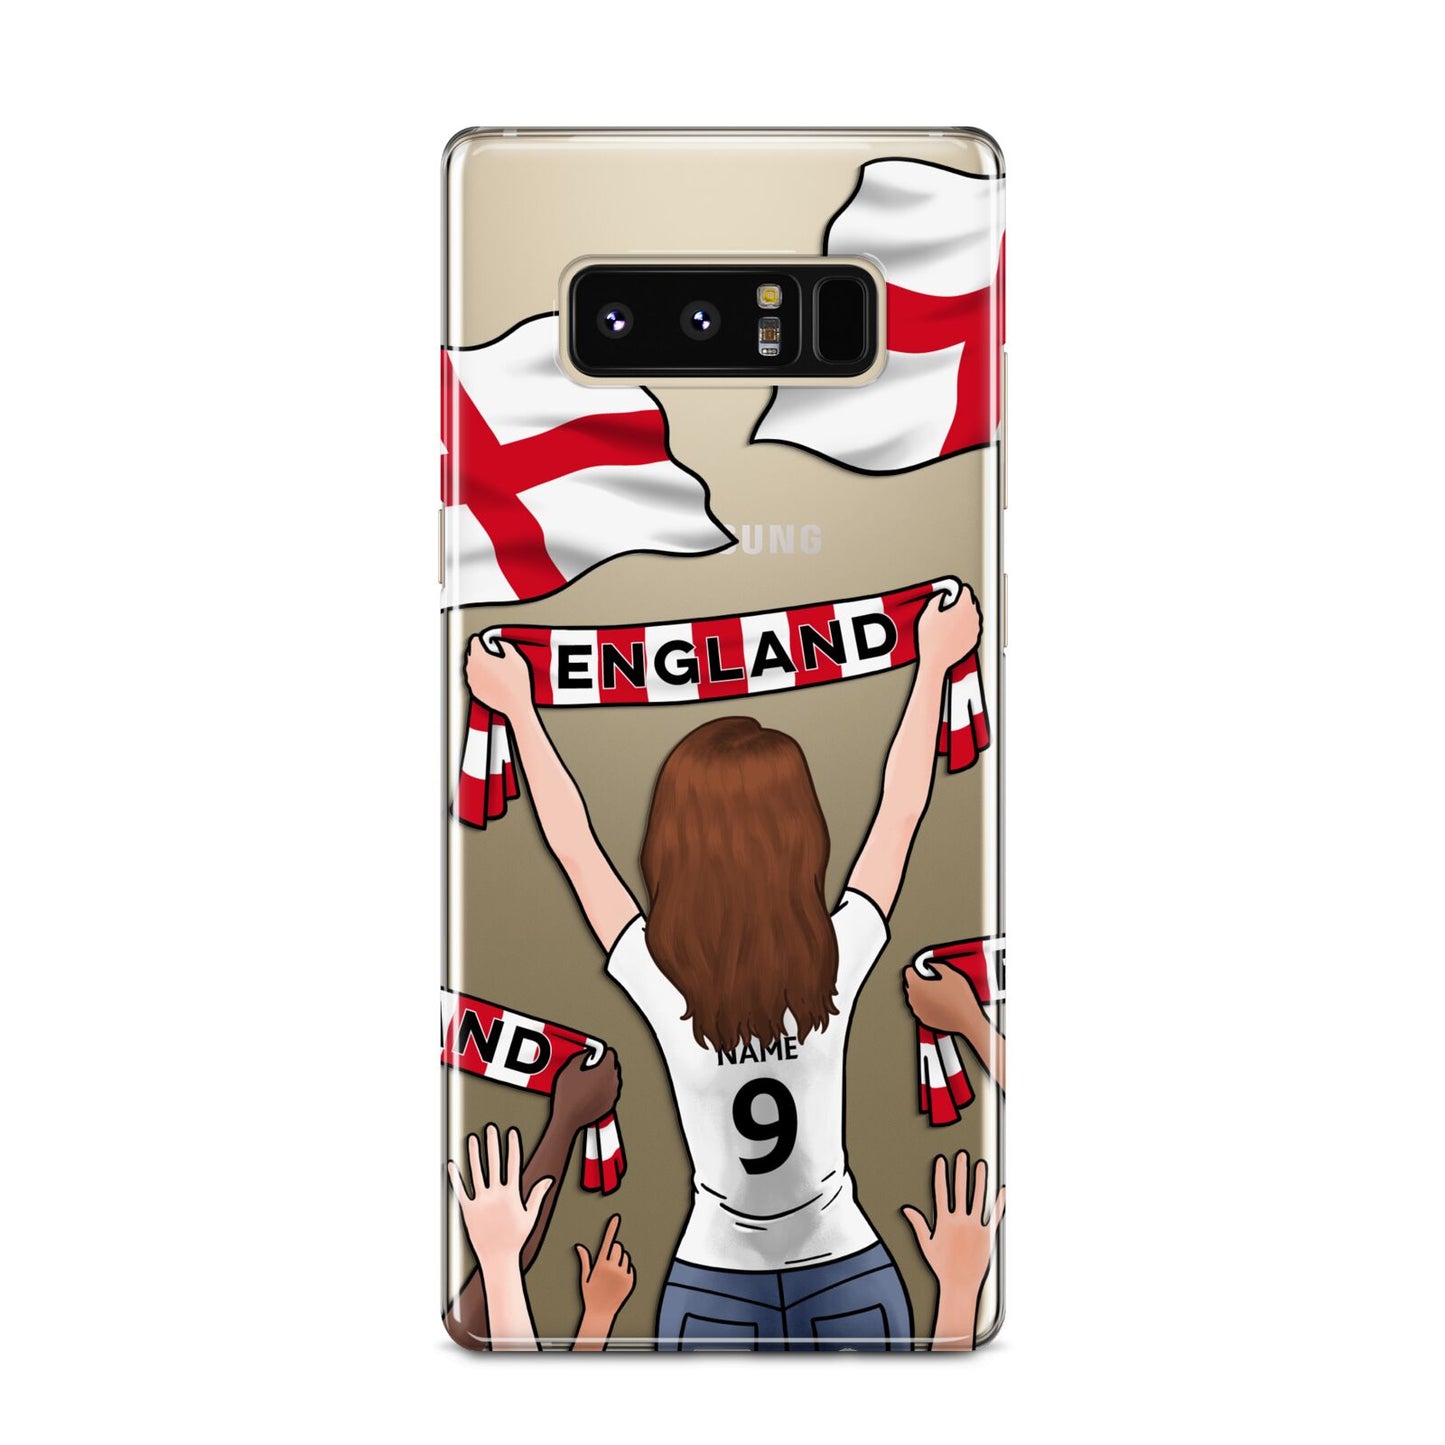 Football Supporter Personalised Samsung Galaxy Note 8 Case